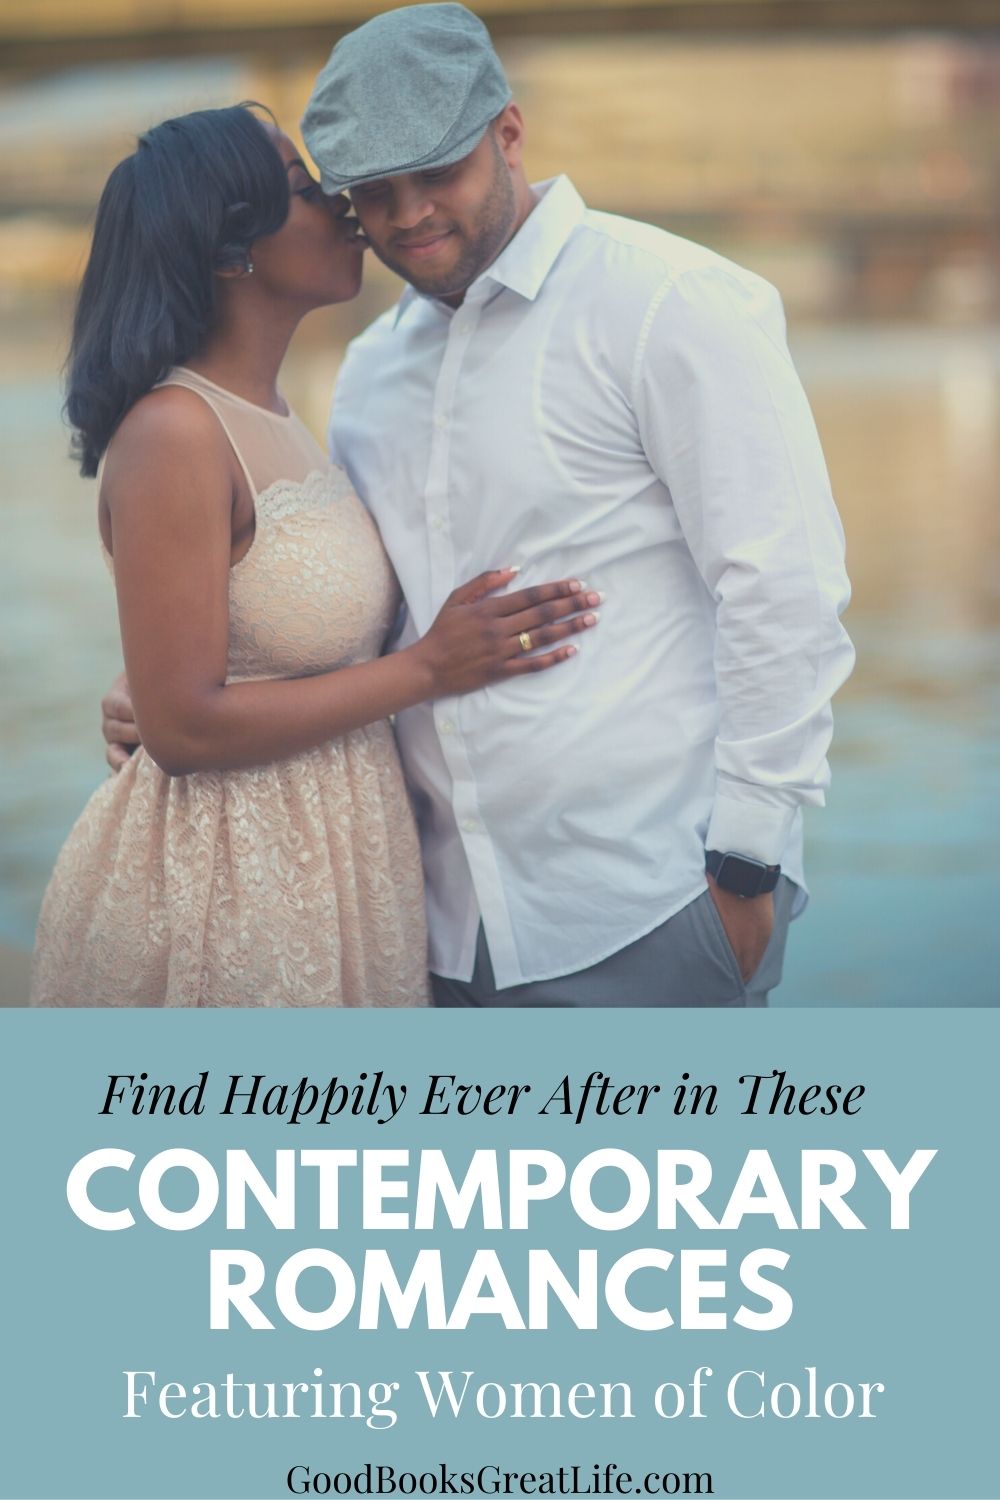 https://goodbooksgreatlife.com/wp-content/uploads/2020/09/Contemporary-Romances-Featuring-Women-of-Color-Pin-1.jpg